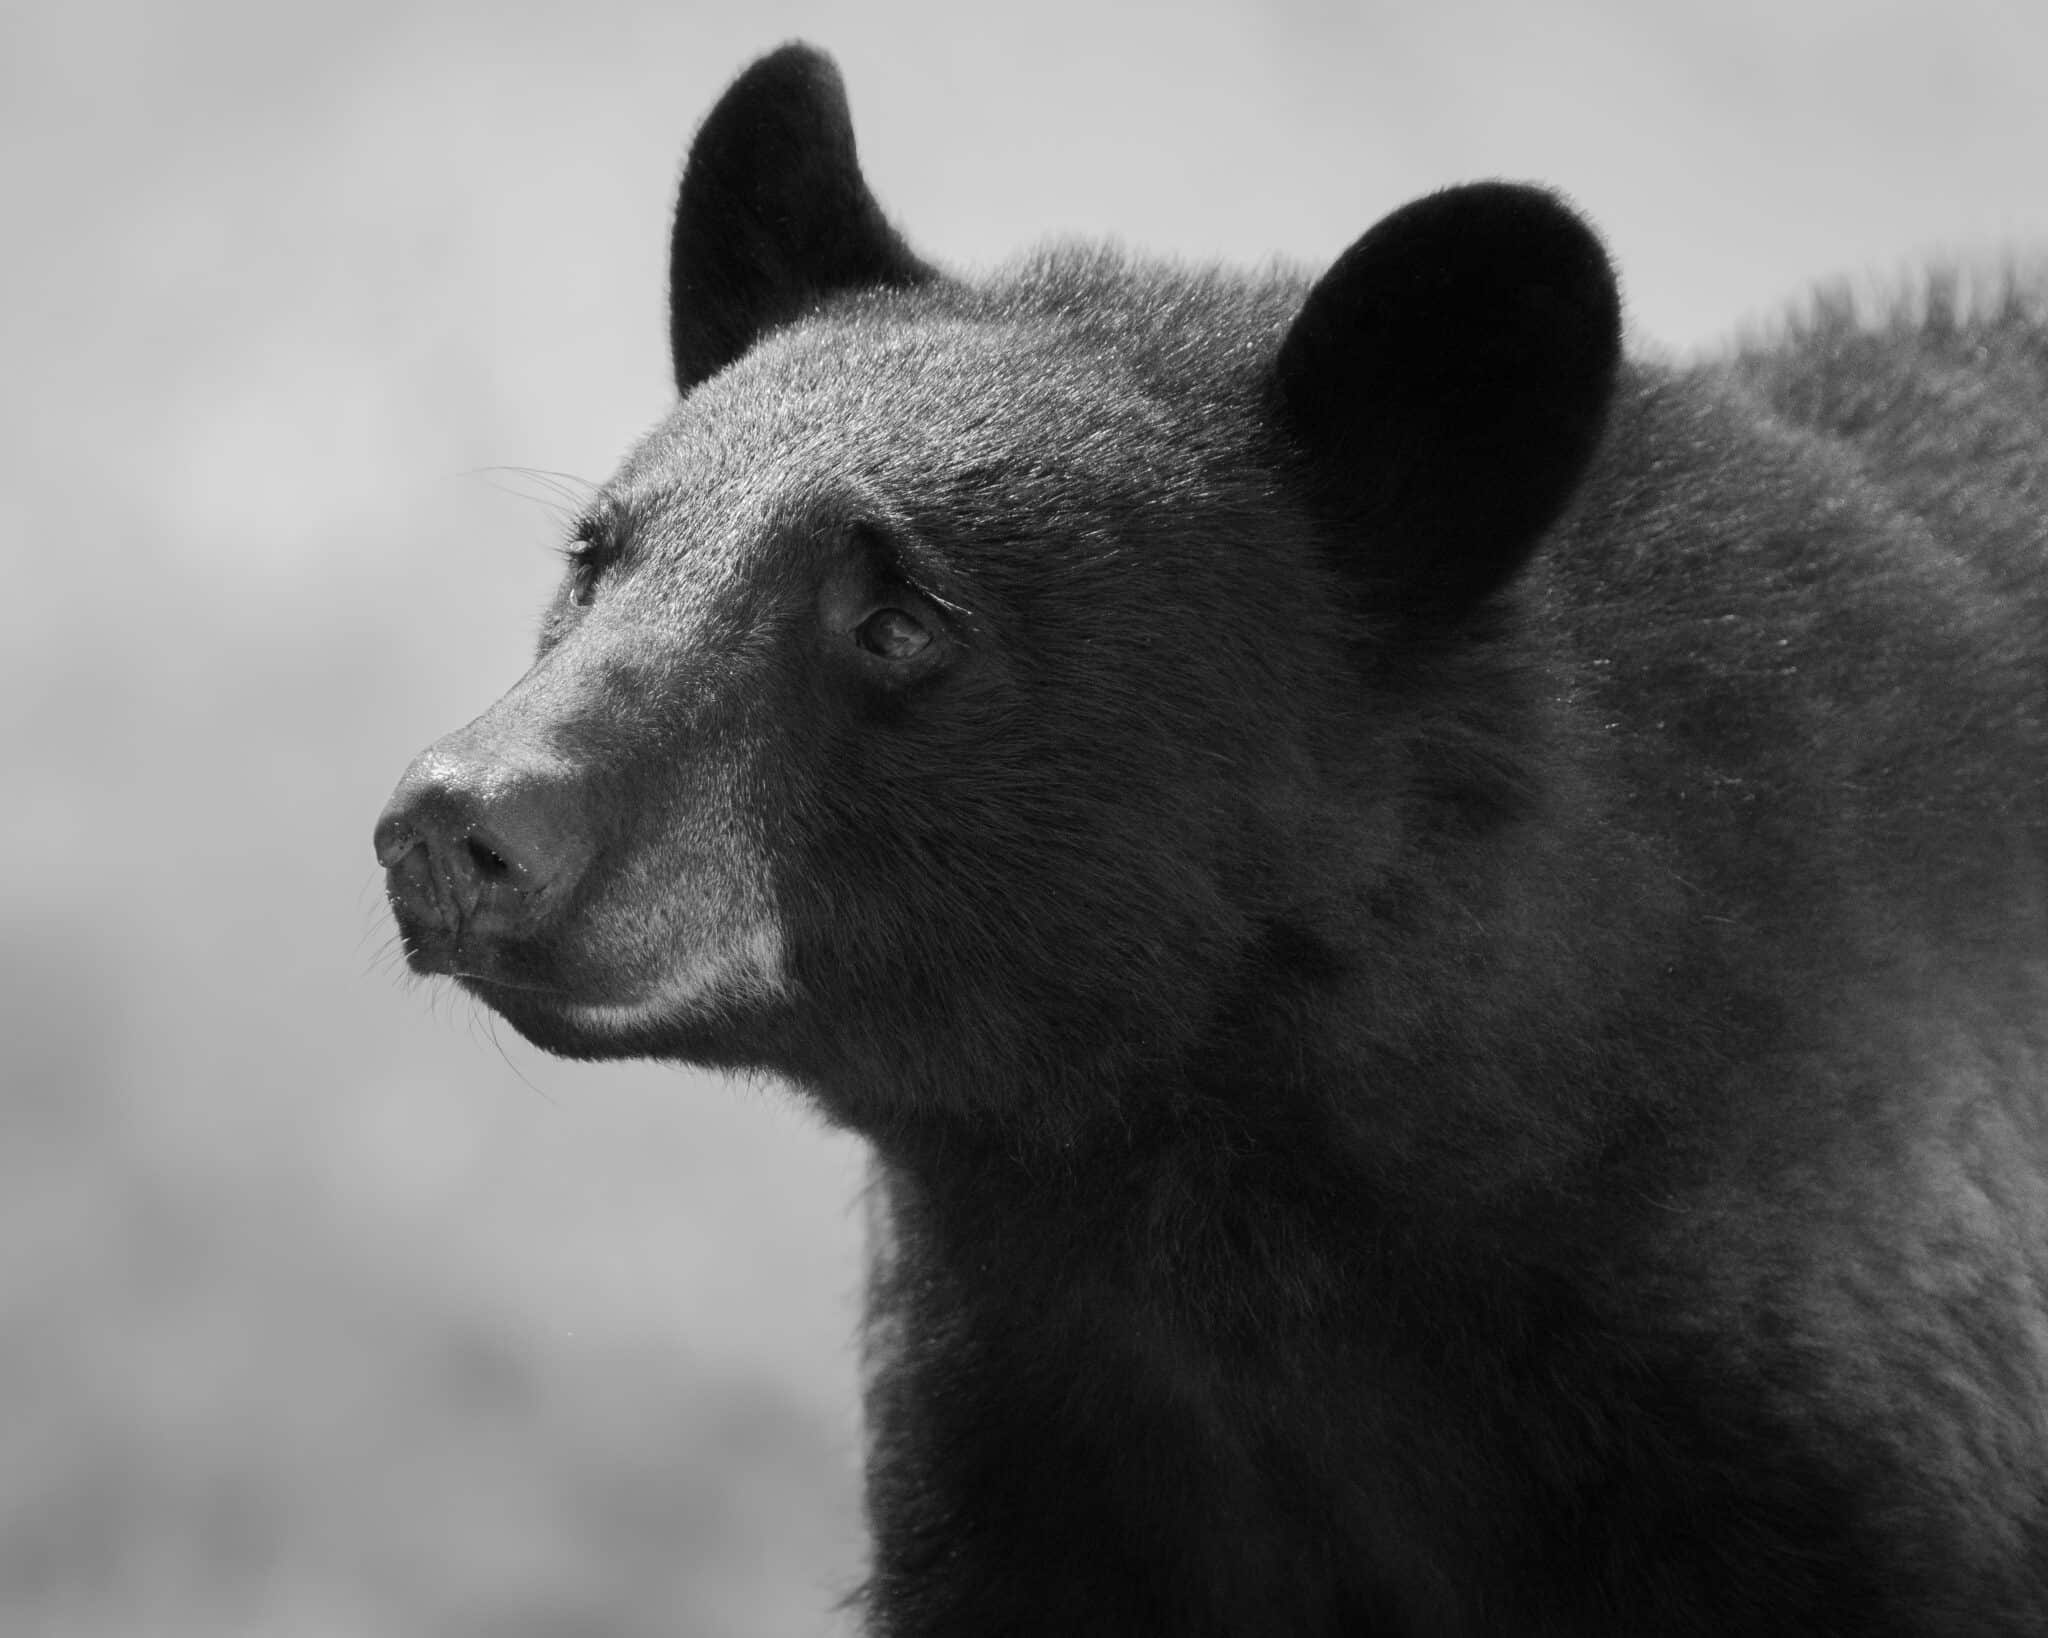 Portrait shot of a young black bear in Black and White.